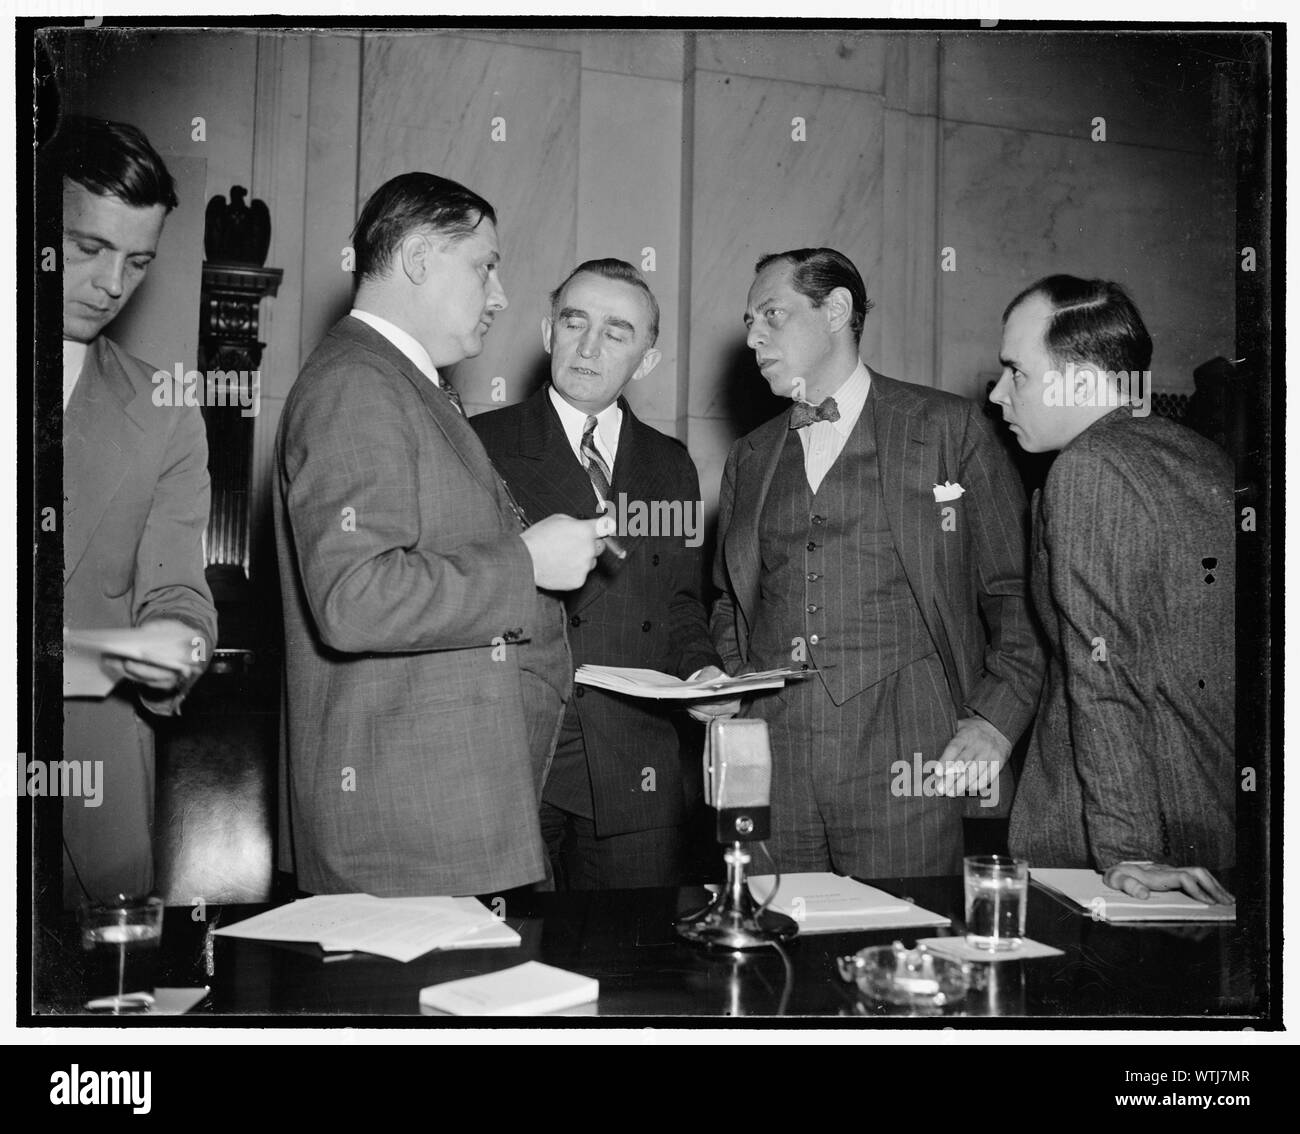 Monopoly huddle. Washington, D.C., Dec. 12. At this informal conference just before the Monopoly Committee opened today's hearing can be seen, left to right: Assistant Attorney General Thurman Arnold, Chairman Joseph C. O'Mahoney, S.E.C. Commissioner Jerome Frank, and Hugh B. Cox, Special Assistant to the Attorney General. In opening today's hearing on the glass industry's patent policies, Cox said the Justice Department seeks to disclose the relation between patent laws and enforcement of anti-trust laws, 12/12/38 Stock Photo